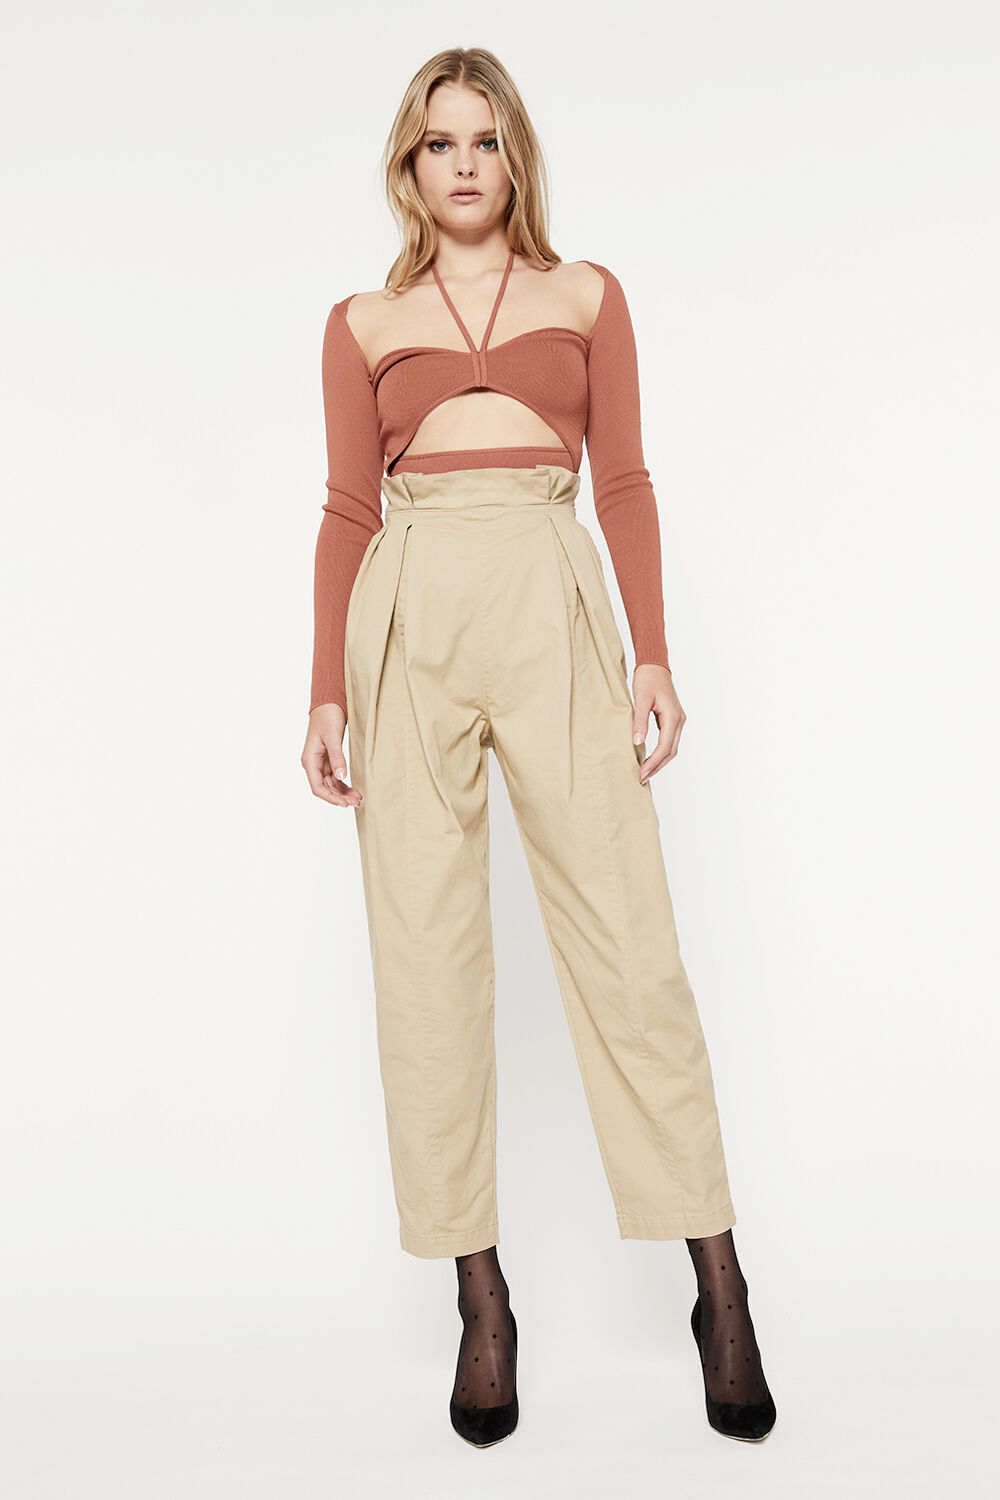 MAXWELL KNIT TOP in colour MOCHA BISQUE